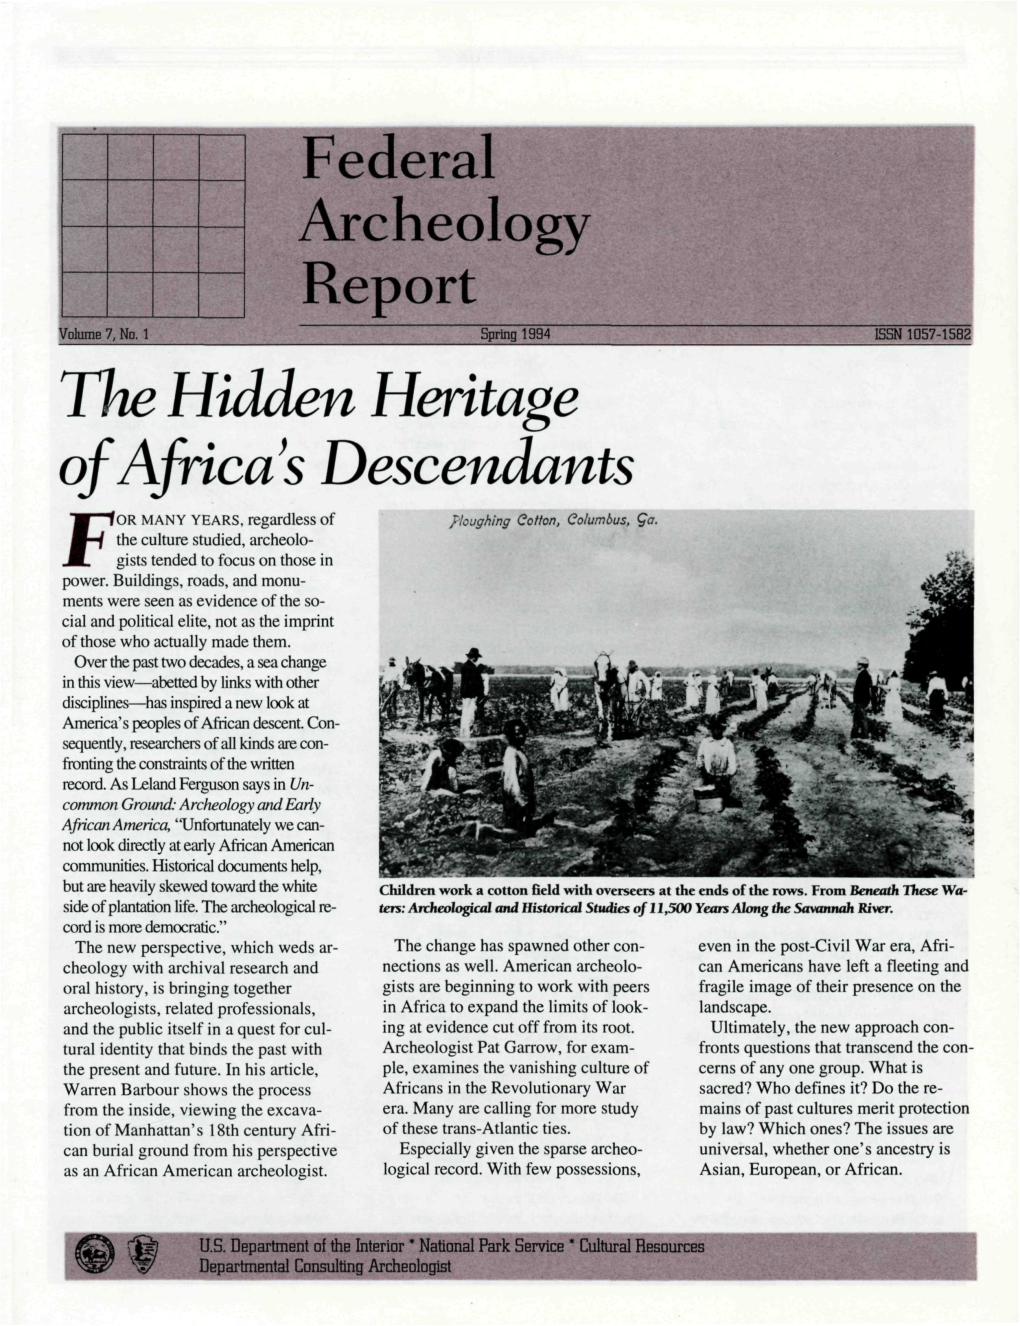 Federal Archeology Report the Hidden Heritage of Africa's